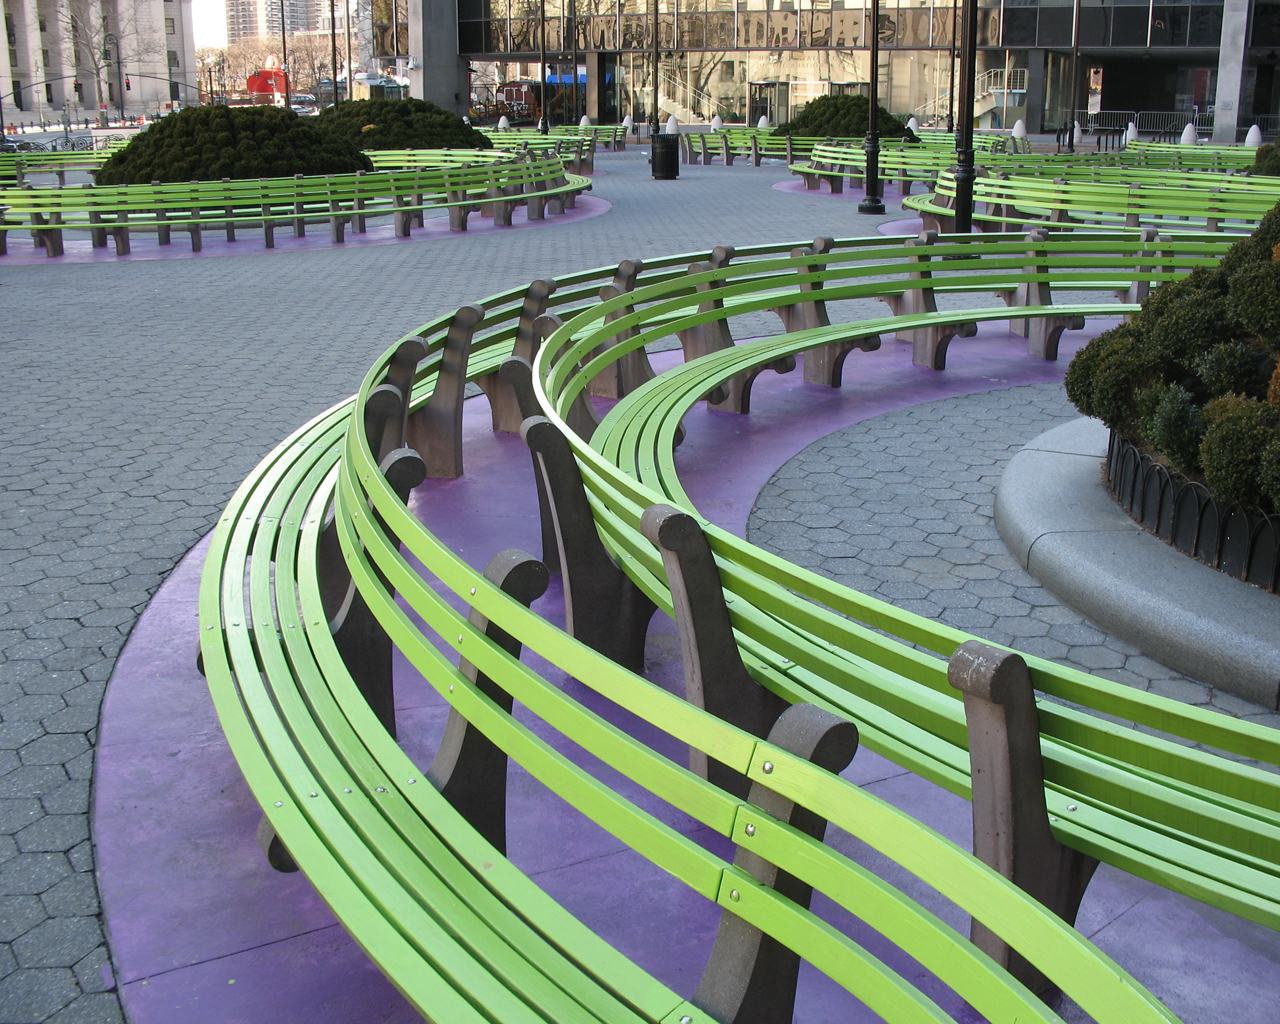 Benches at the International Court of Trade